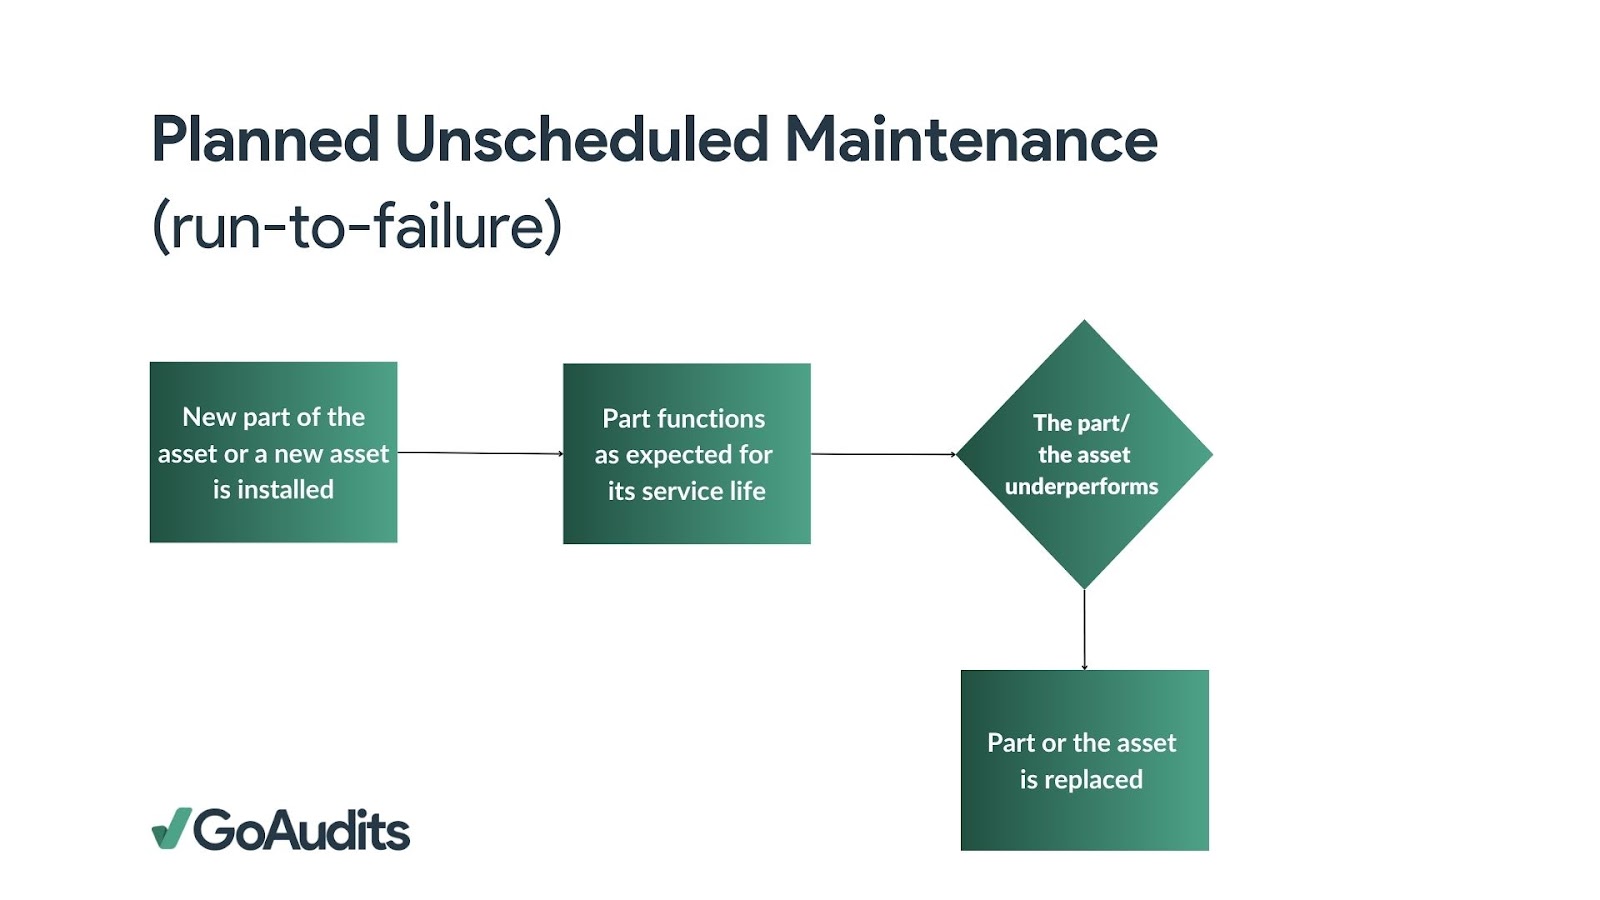 Planned Unscheduled Maintenance workflow - GoAudits - Planned Maintenance blog post image 